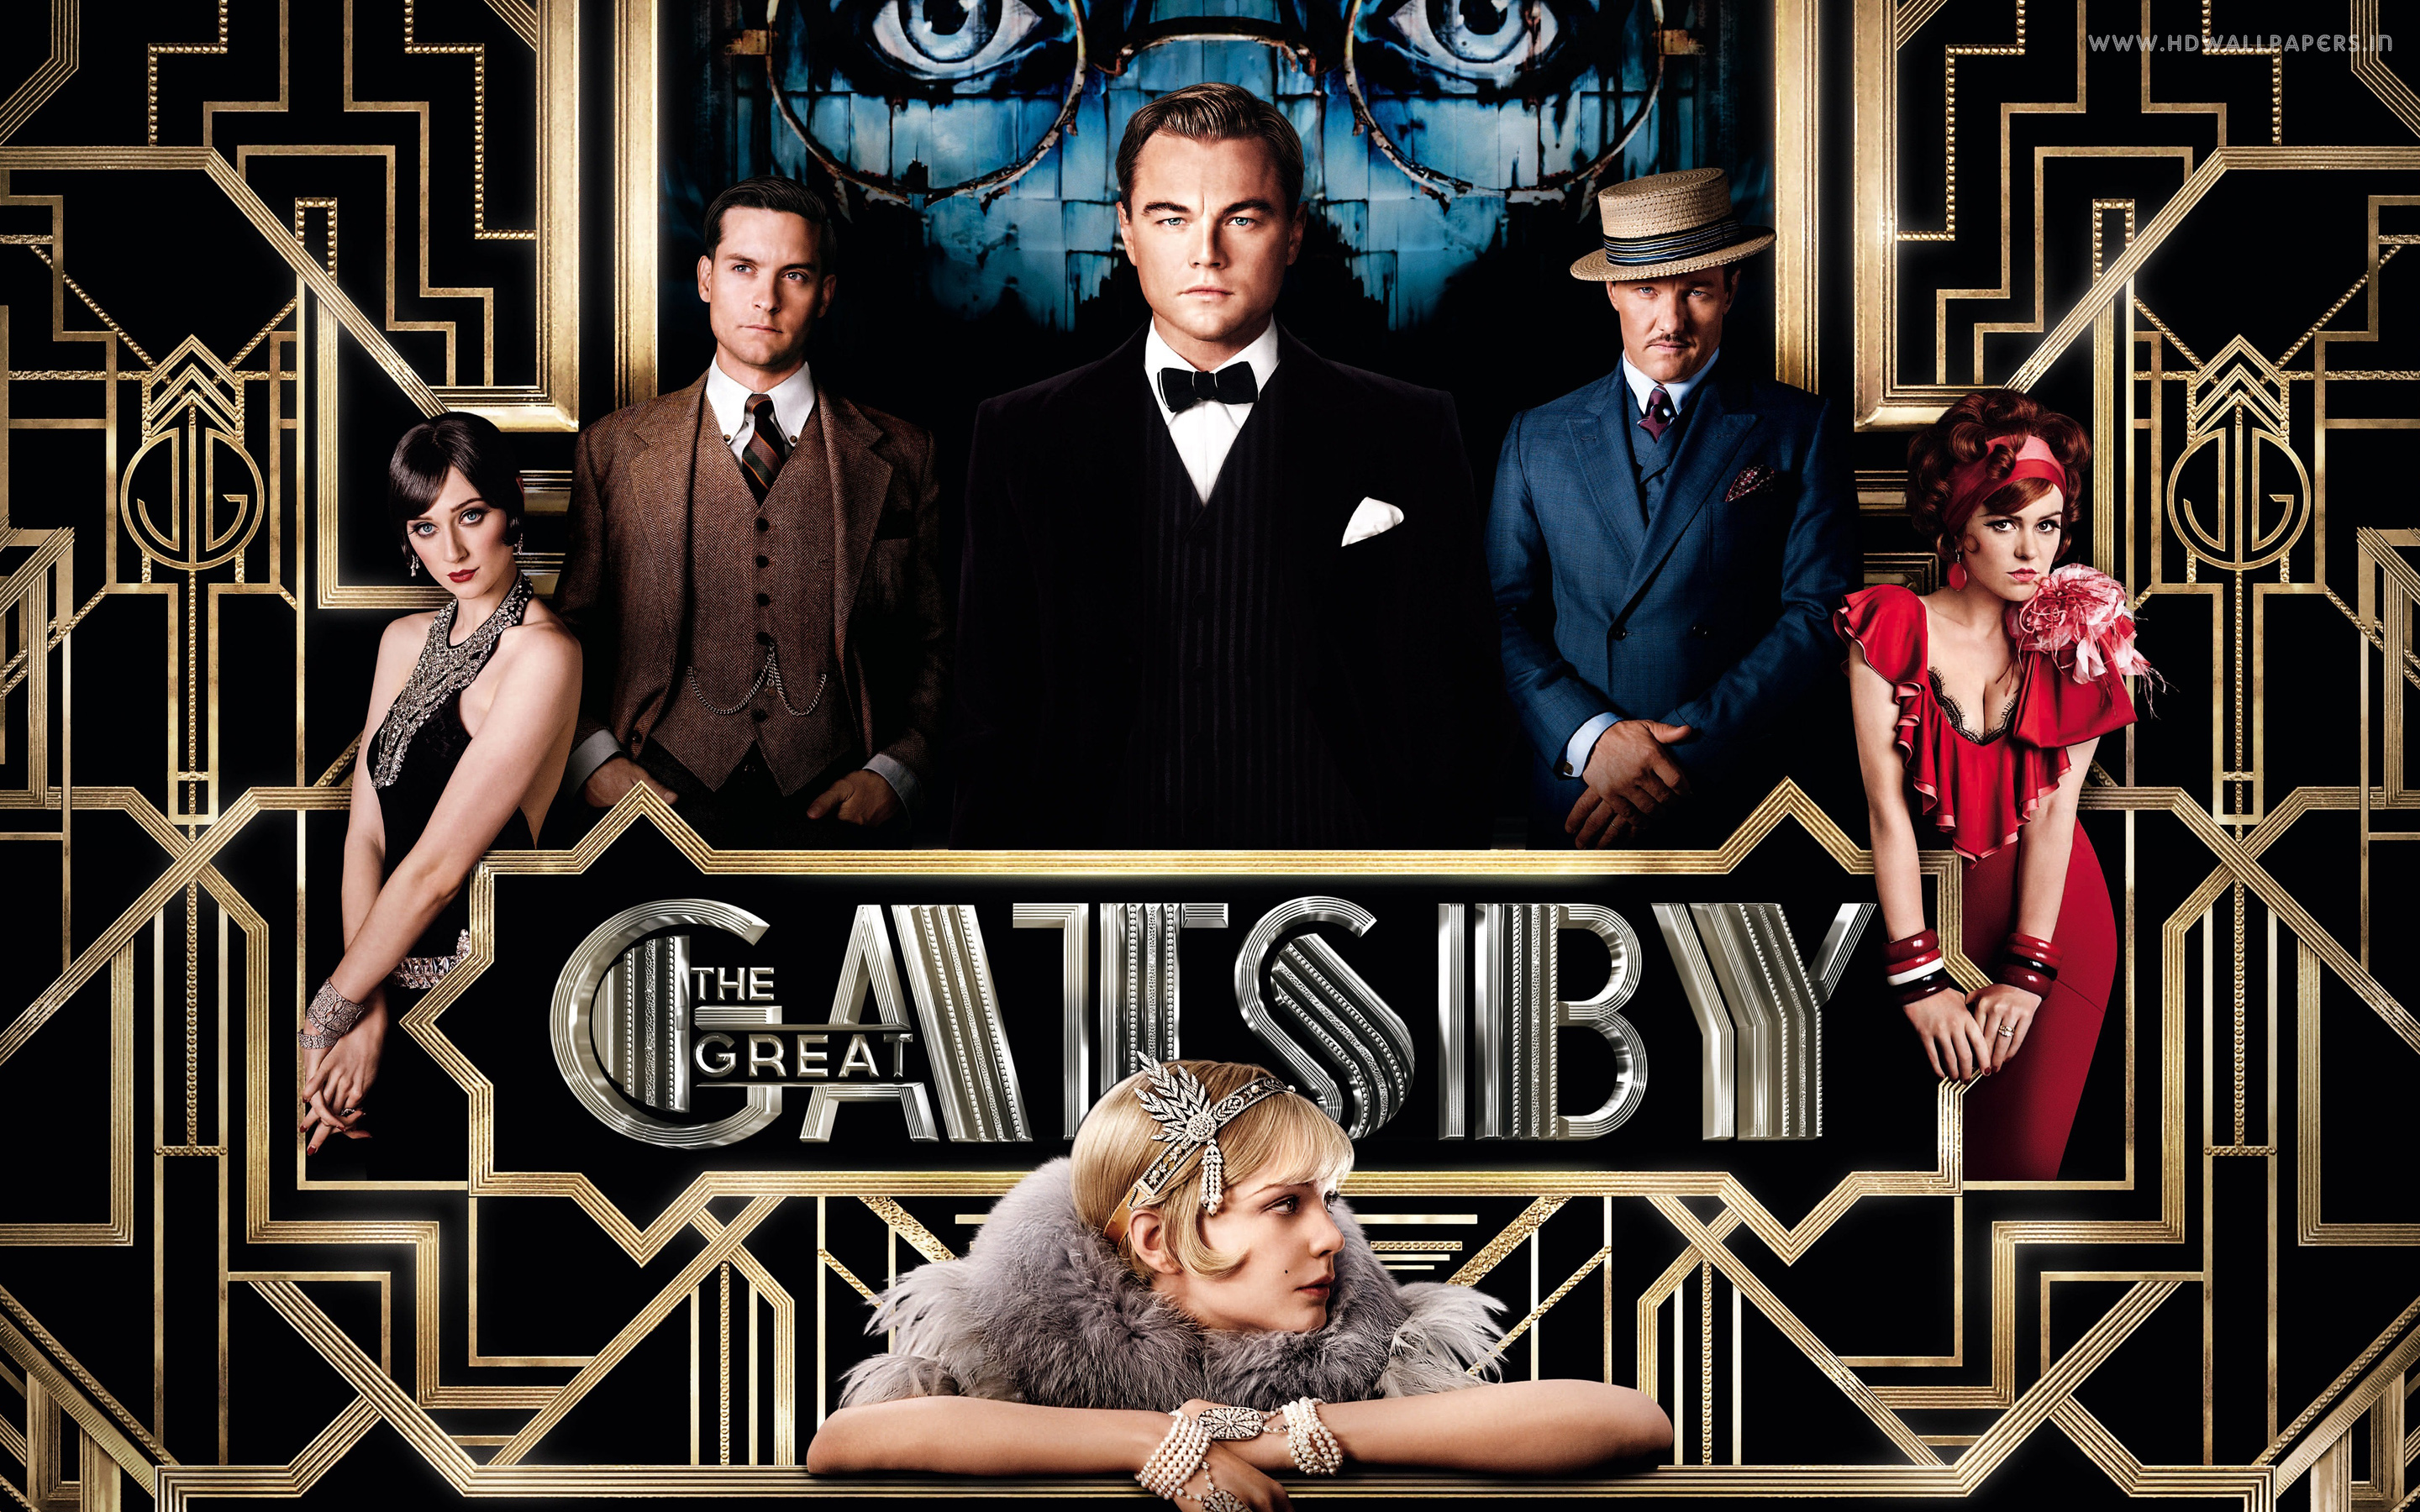 http://blog.commarts.wisc.edu/wp-content/uploads/2013/05/the-great-gatsby-movie.jpg